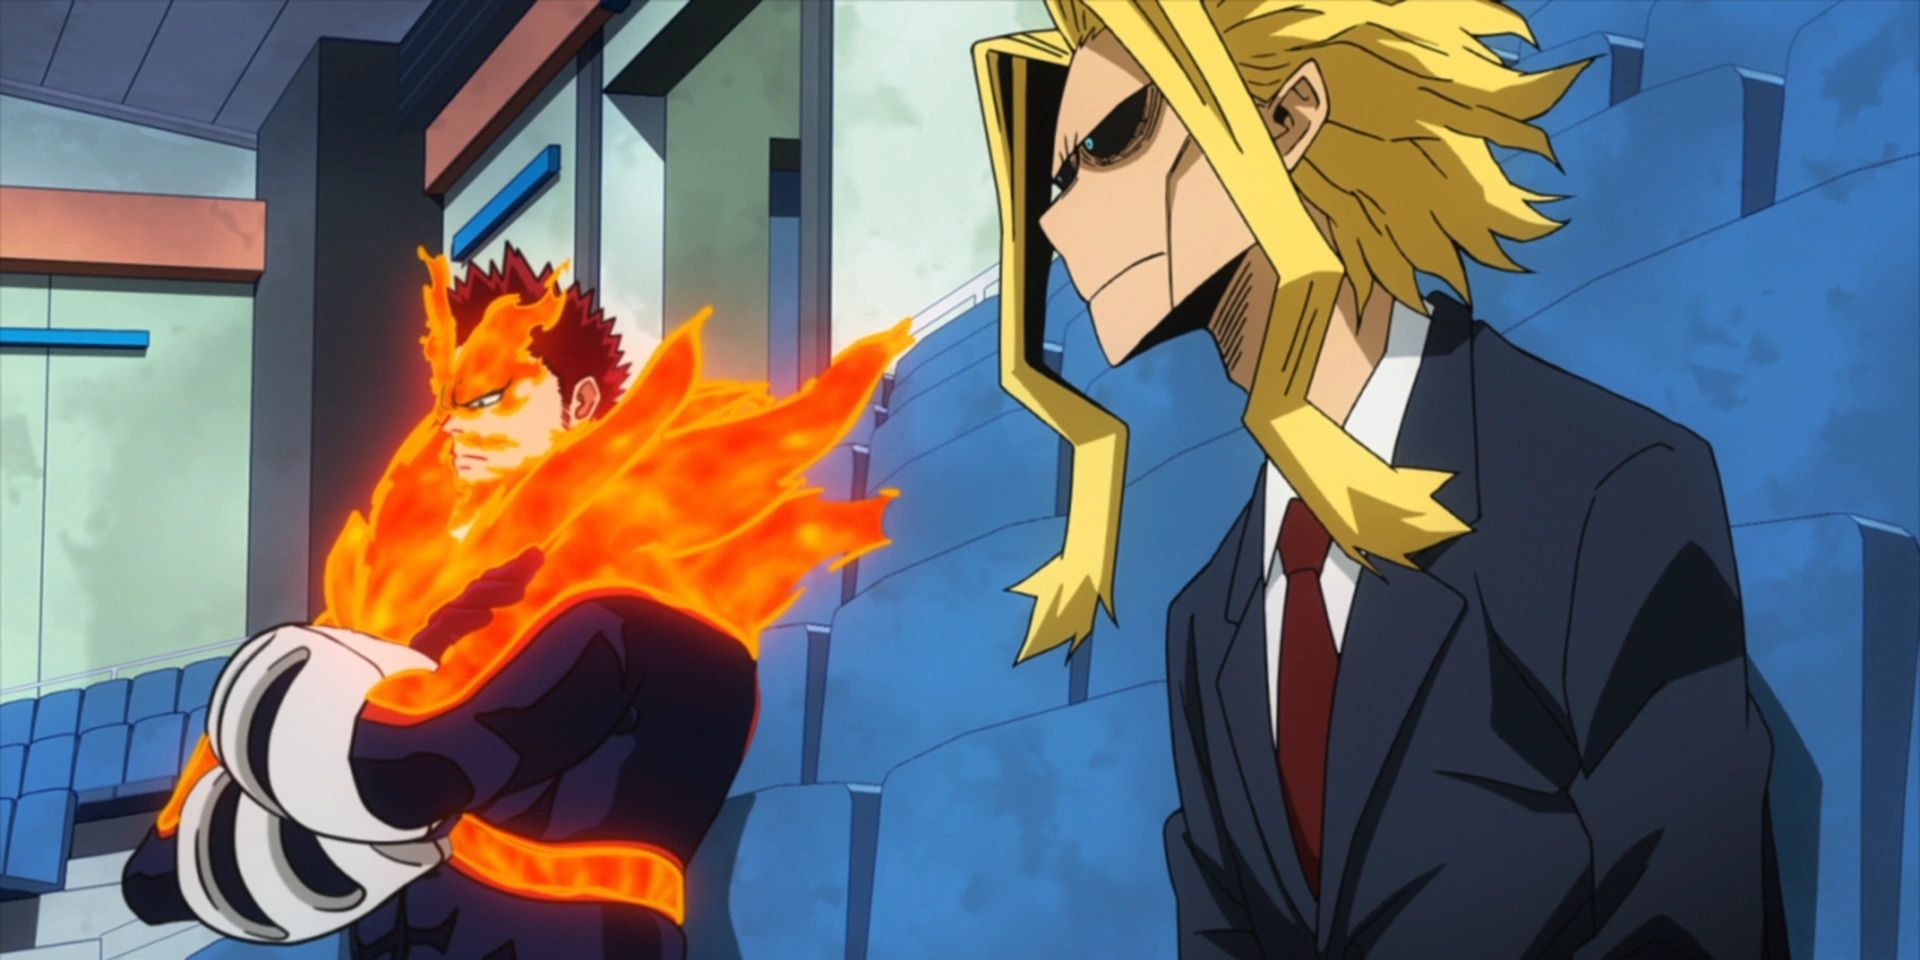 Endeavor & All Might in My Hero Academia